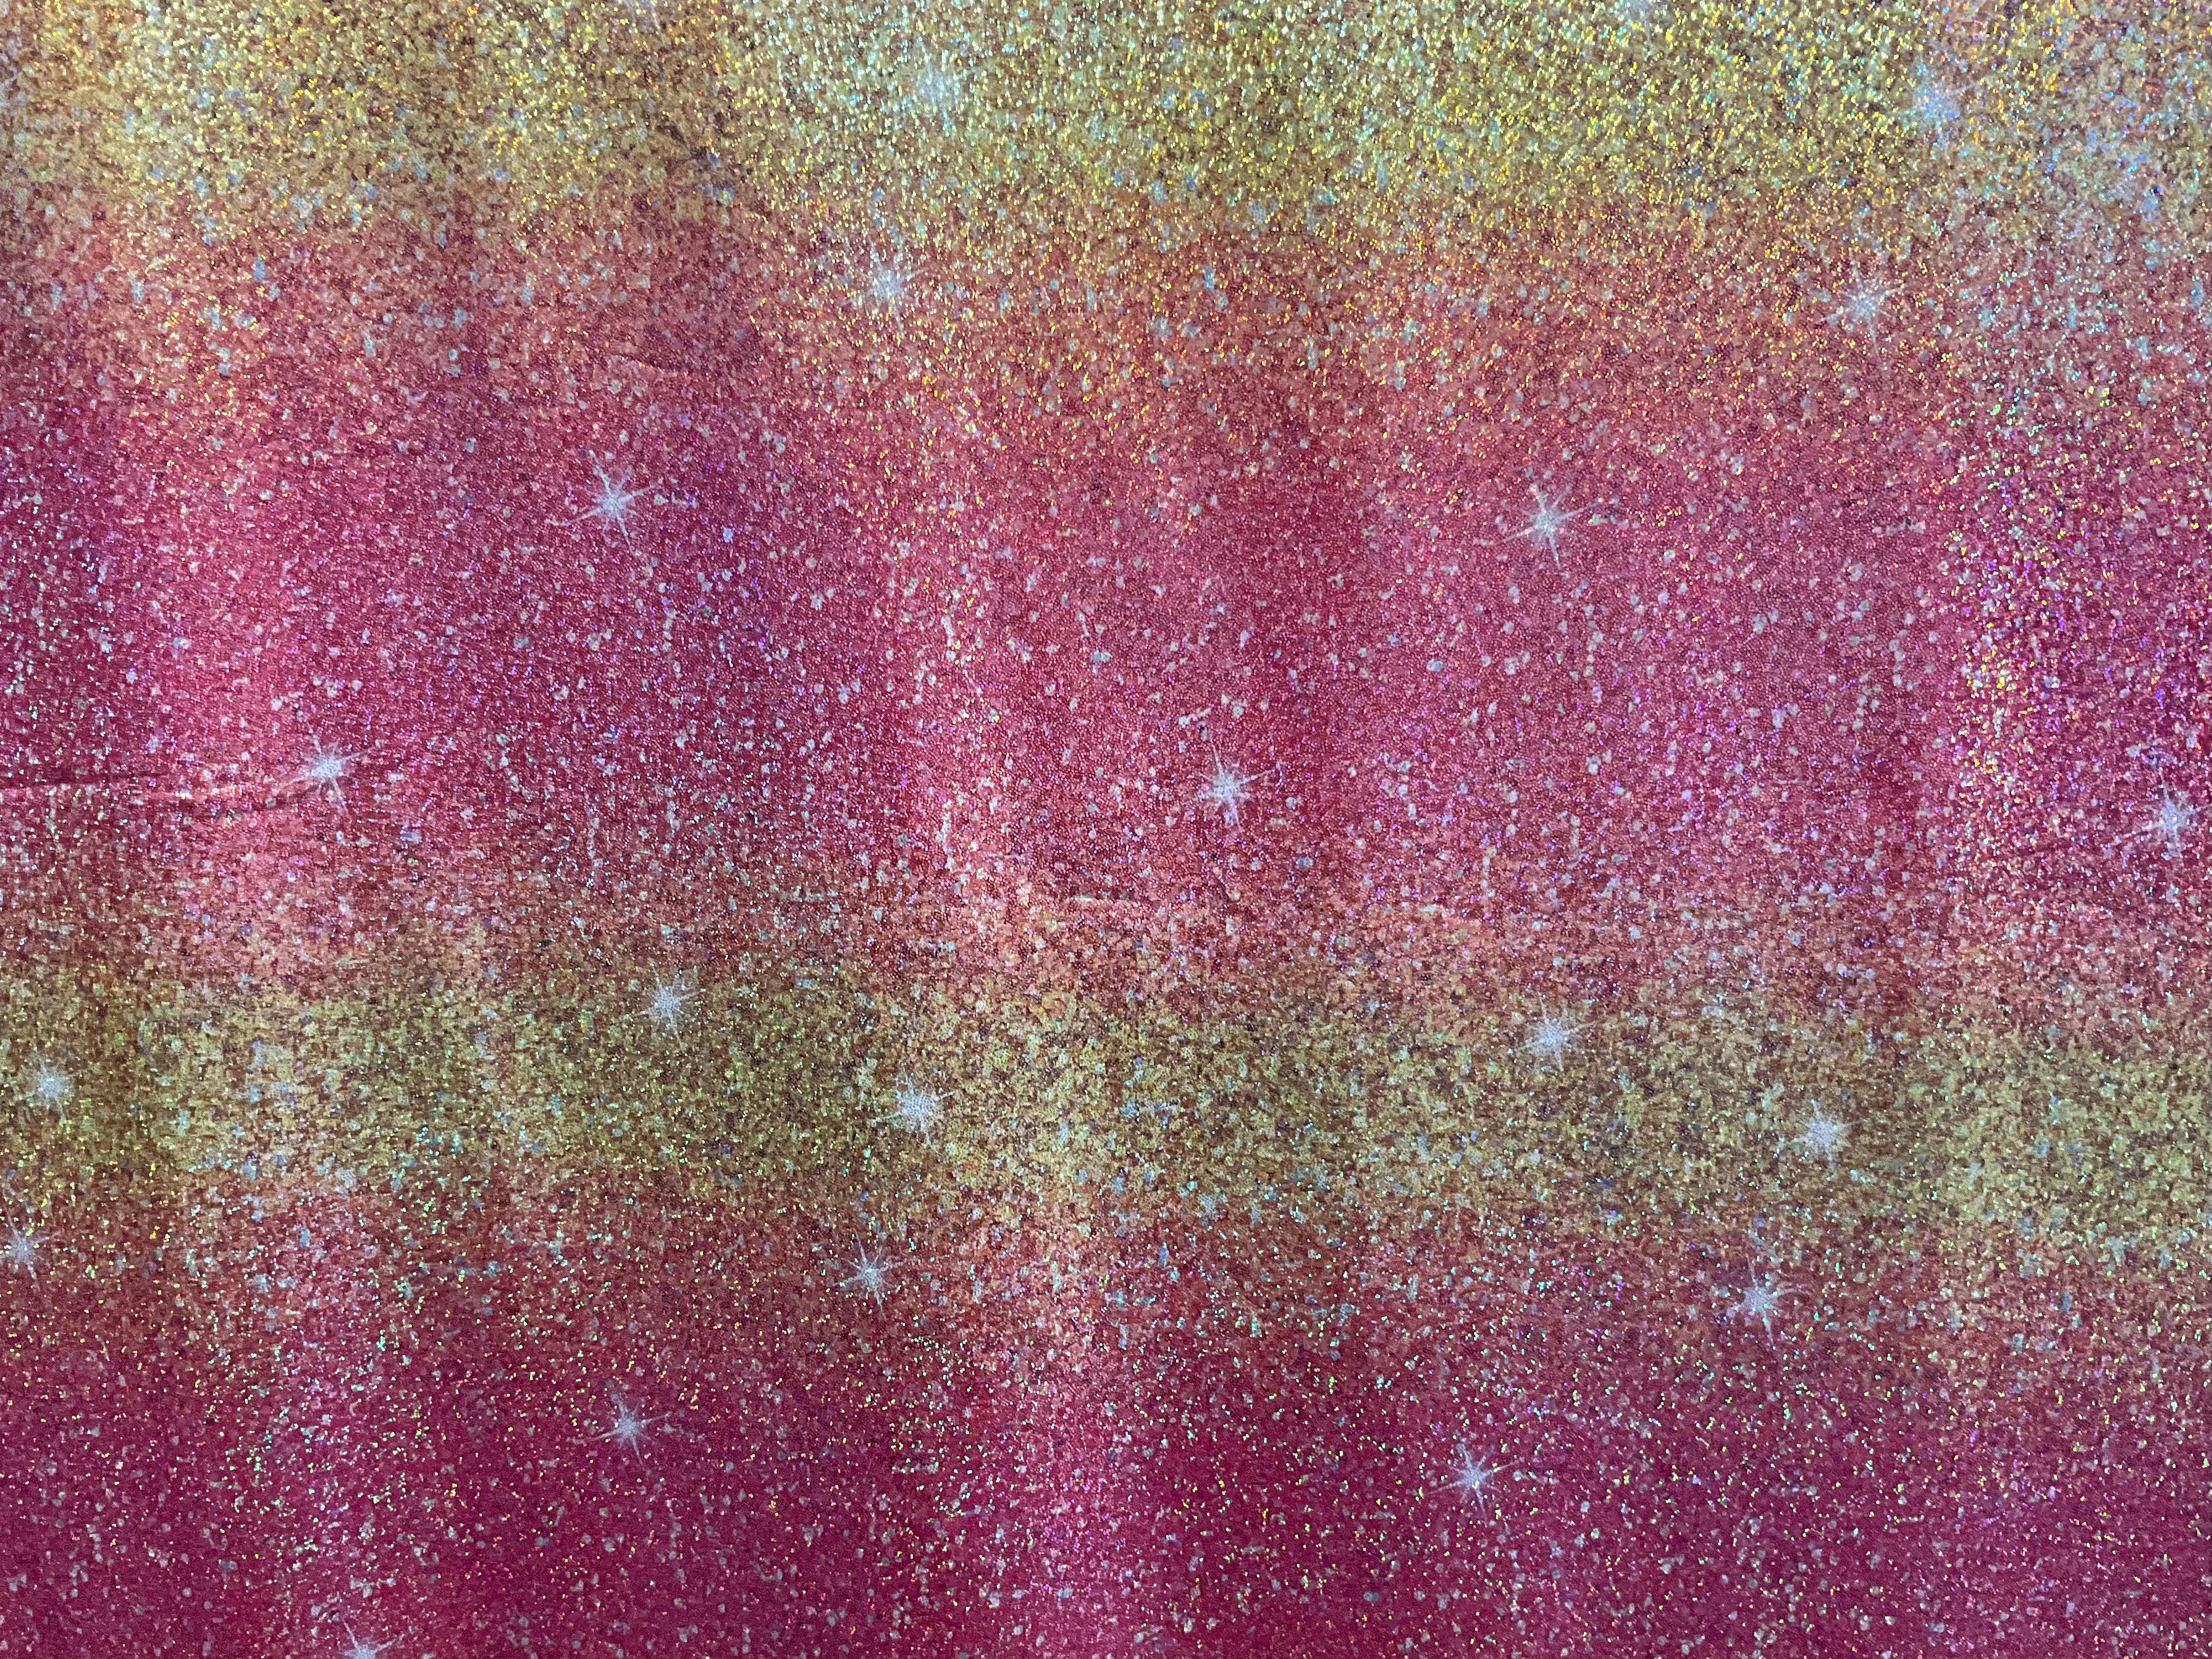 Holographic Sparkle Pink and Yellow Ombre Glitter Activewear/Dancewear